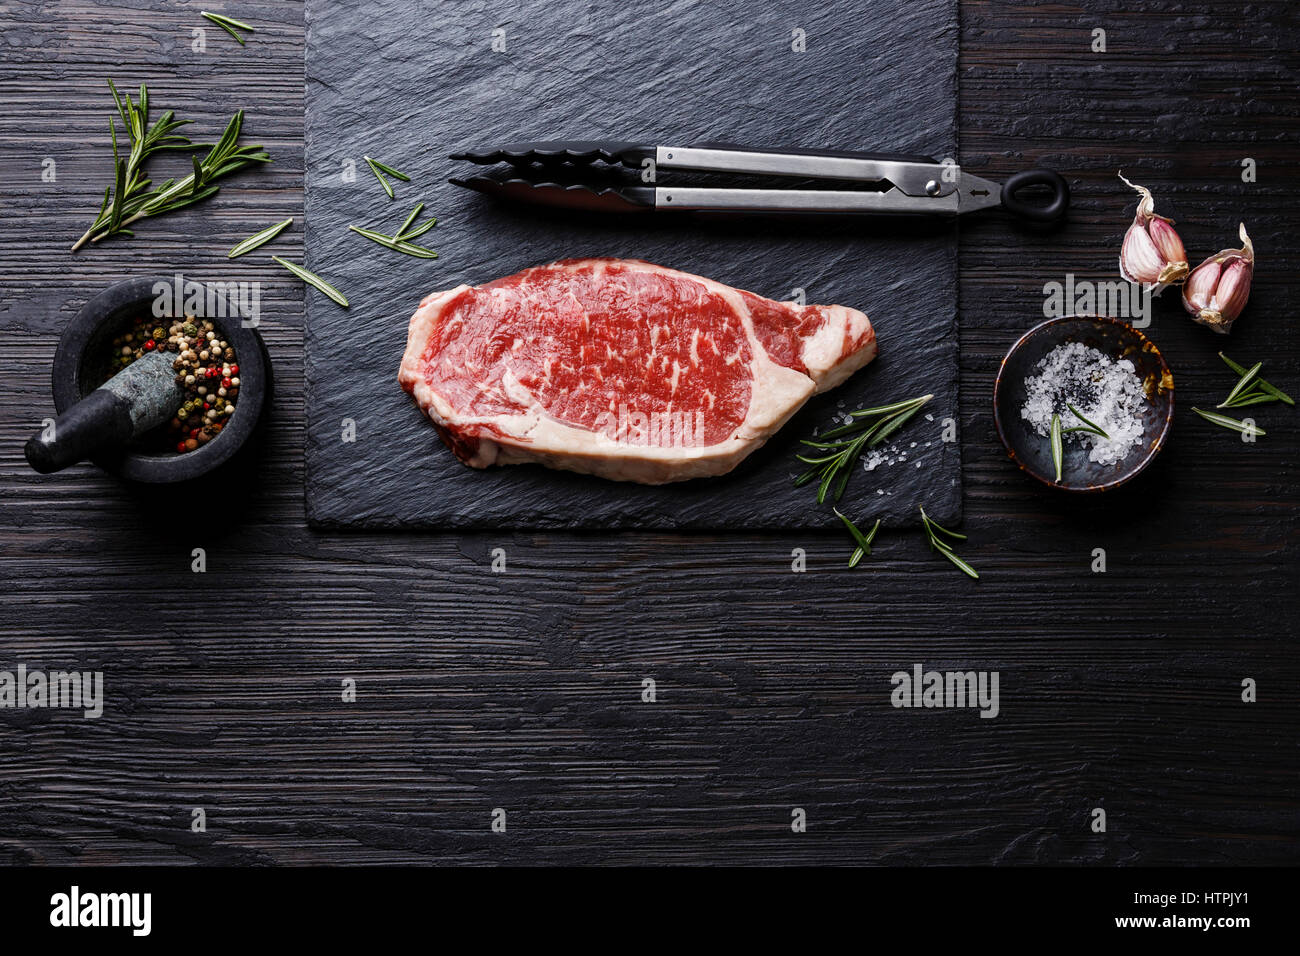 Raw fresh meat Steak Striploin and seasonings on black burned wooden background copy space Stock Photo